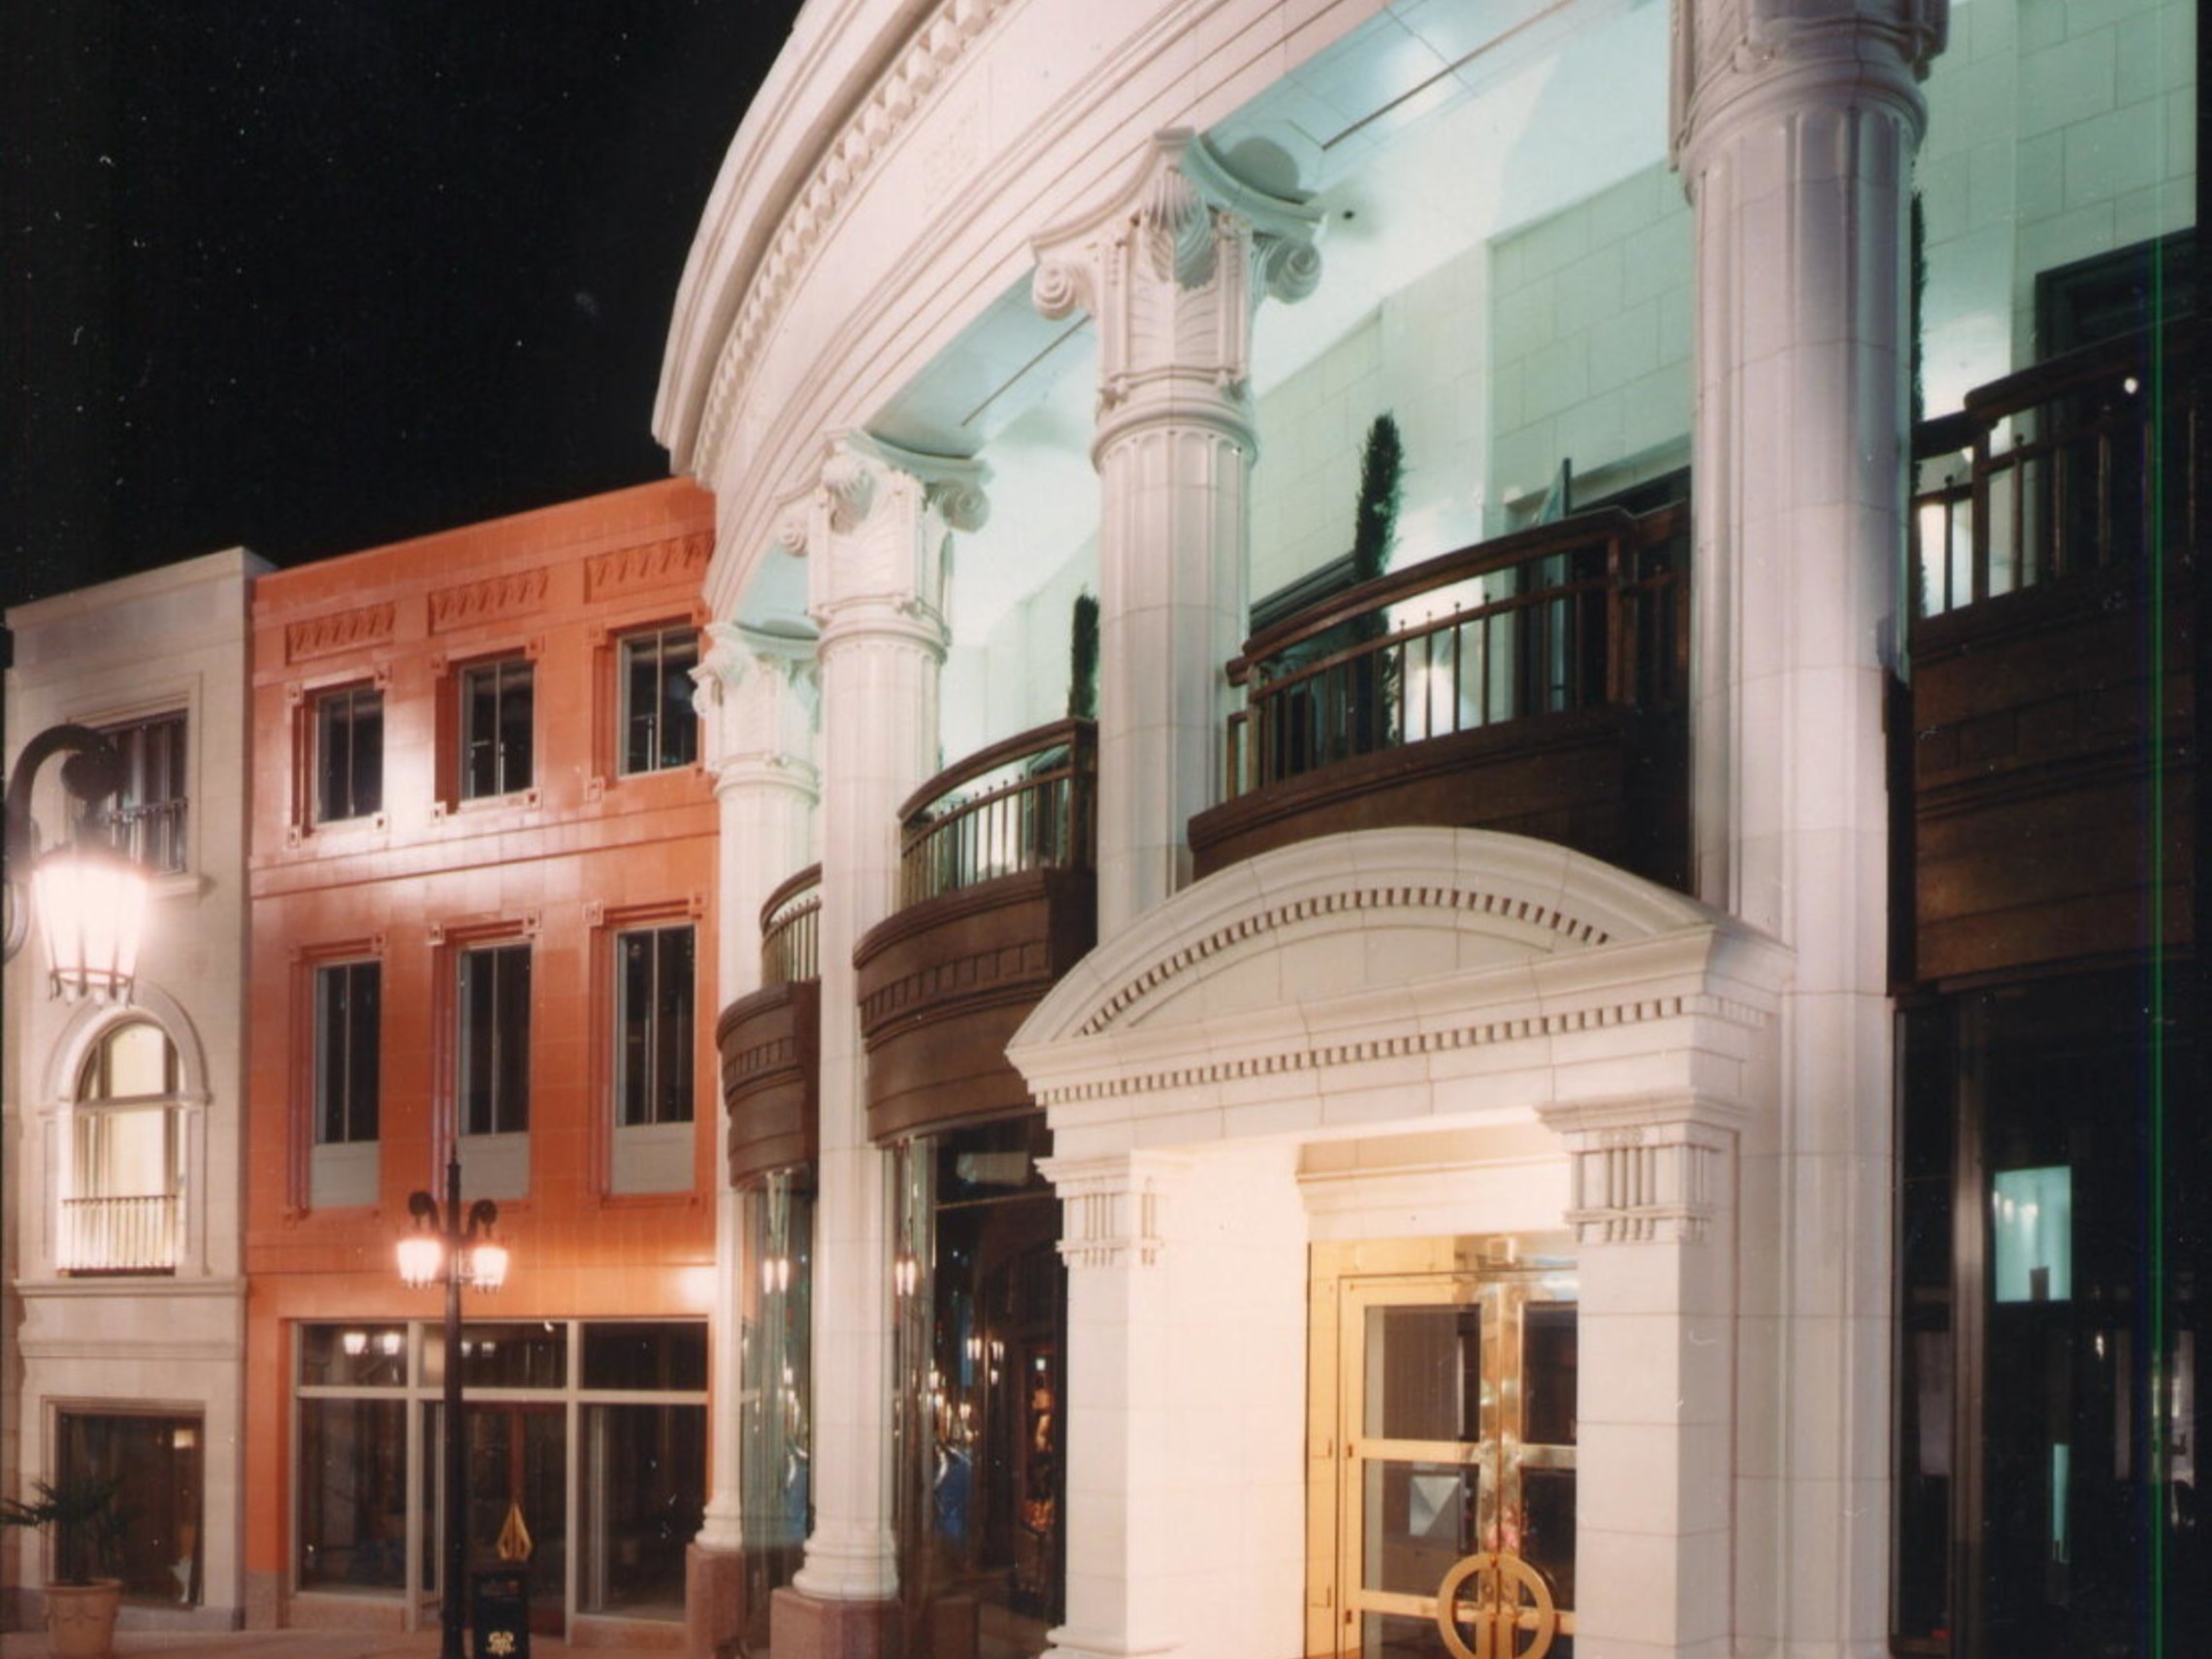 Two Rodeo Drive Storefront 1100x1378